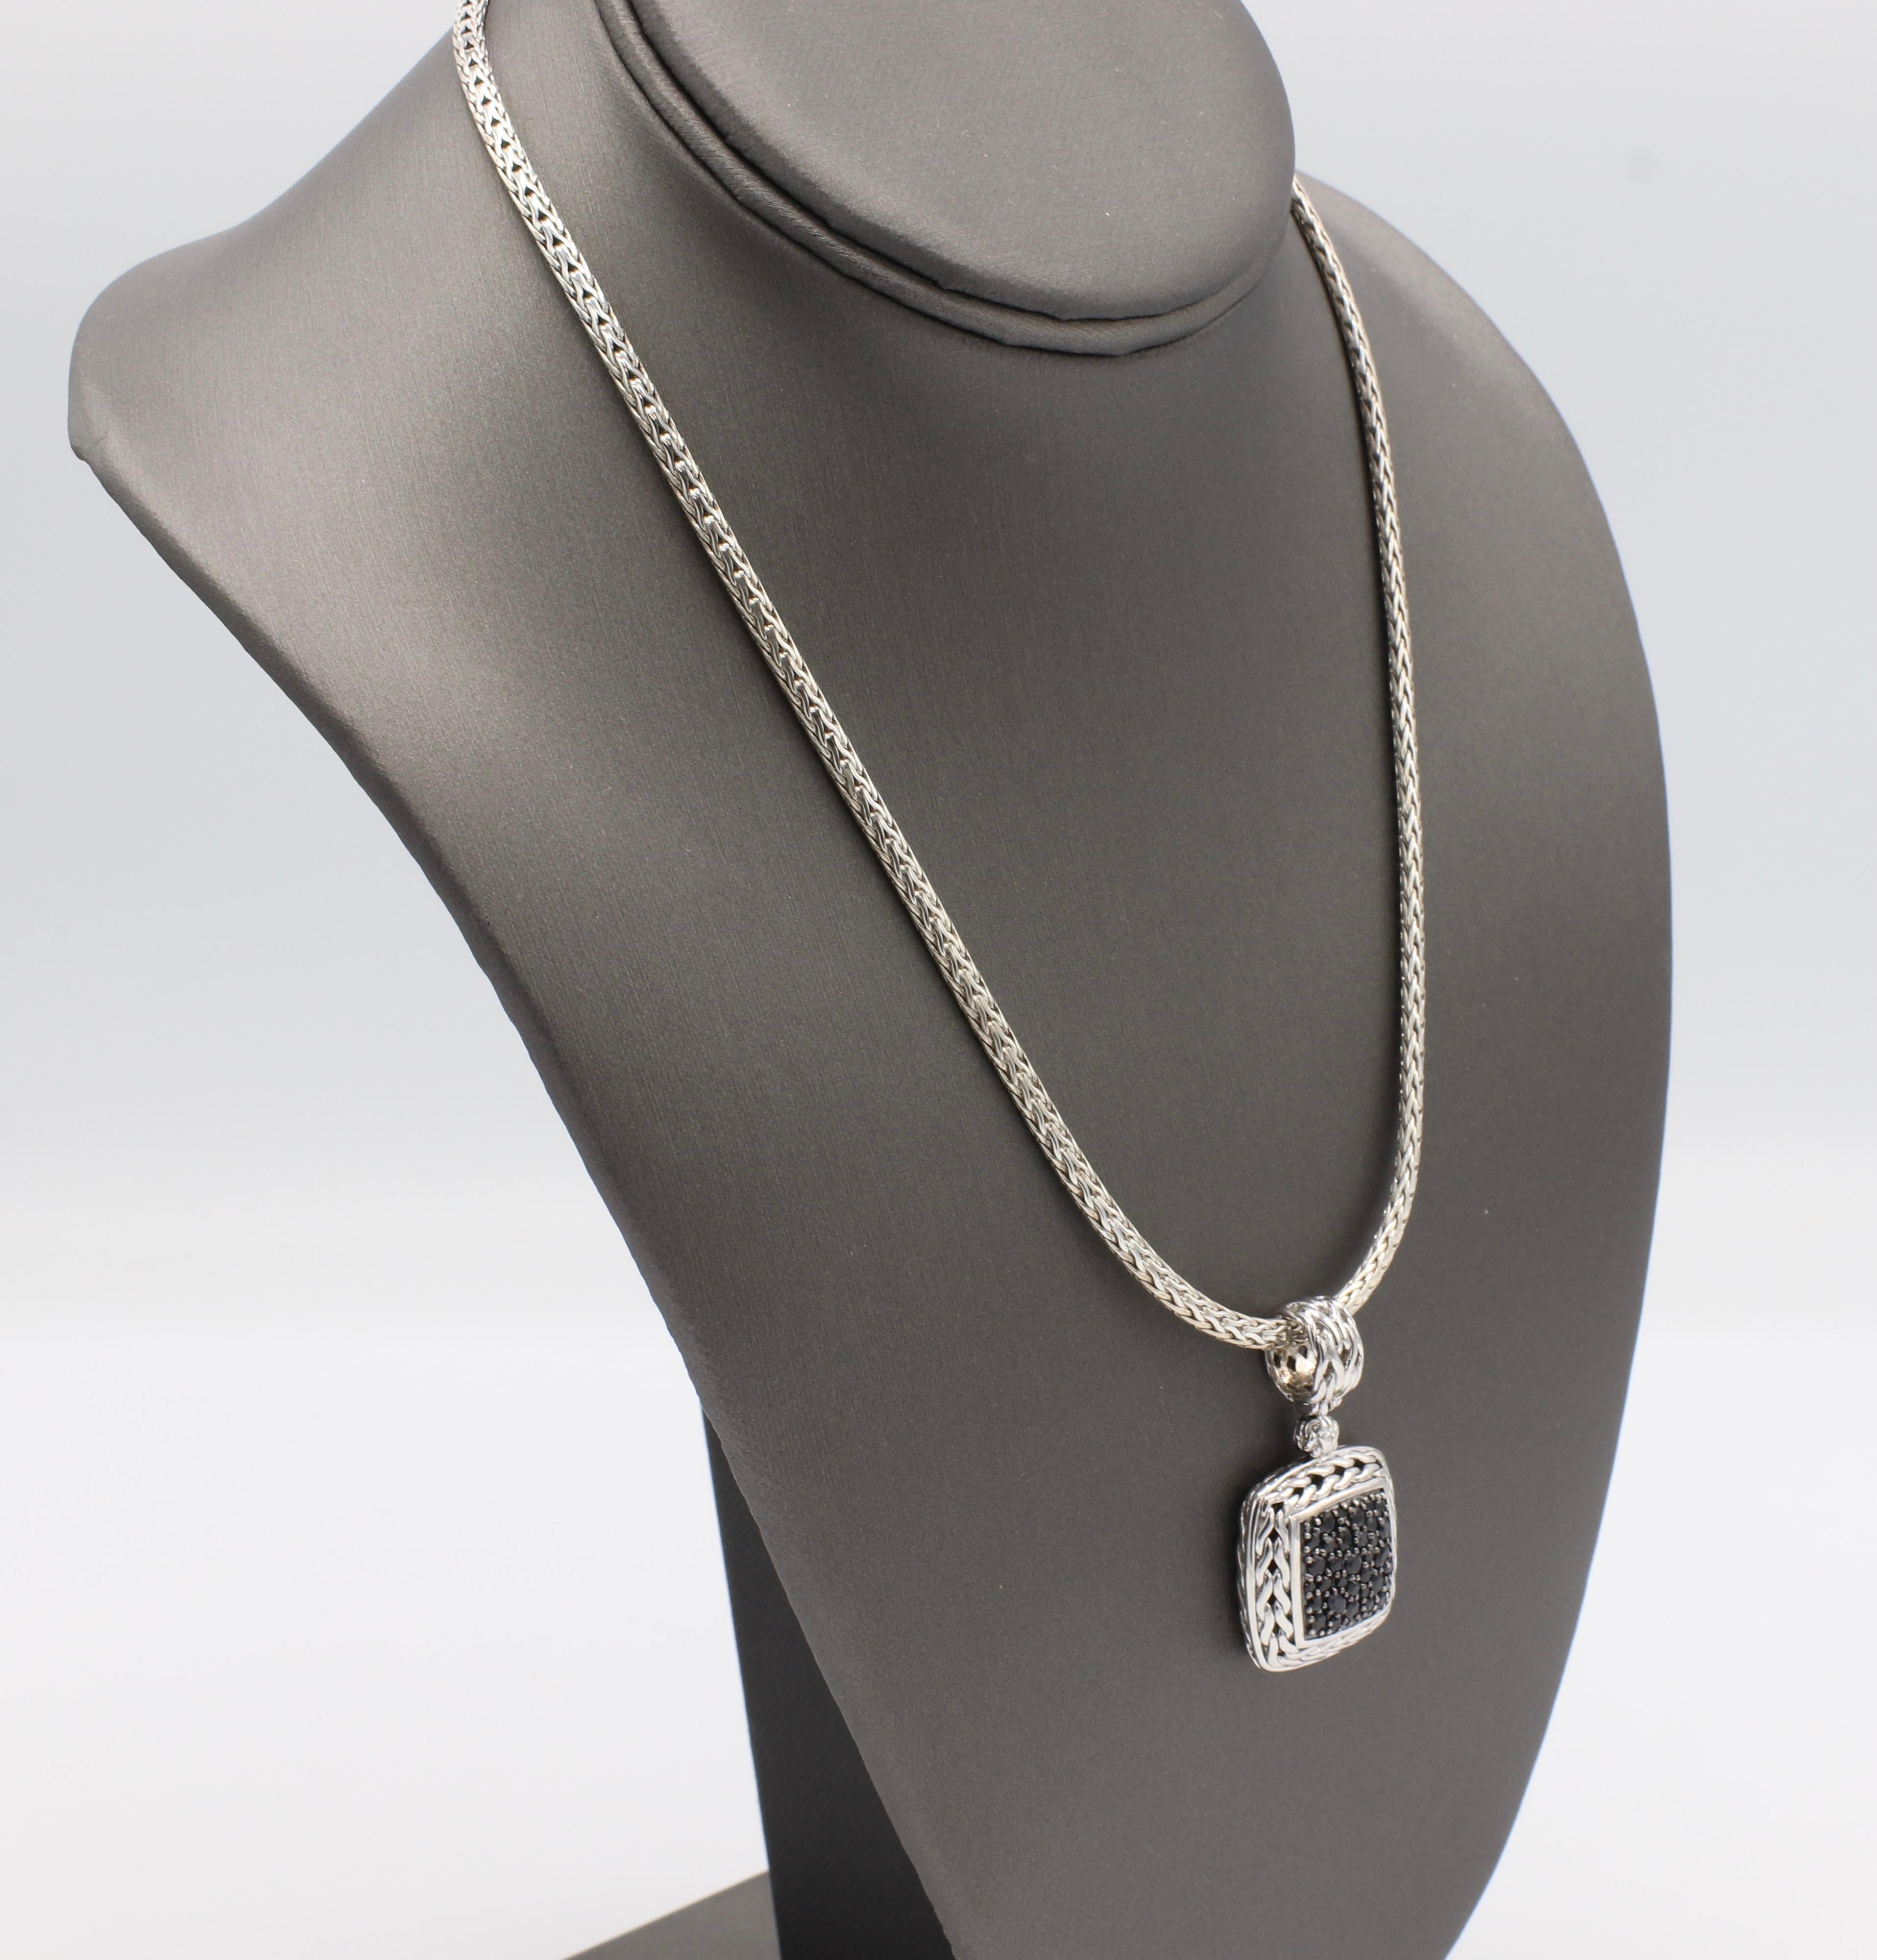 John Hardy Classic Sterling Silver Chain Lava  Square Pendant Necklace with Black Sapphires
Metal: Sterling Silver 925
Weight: 33.17 grams
Pendant is 40.5mm x 24mm
Chain length: 18 inches
Chain width: 3MM
